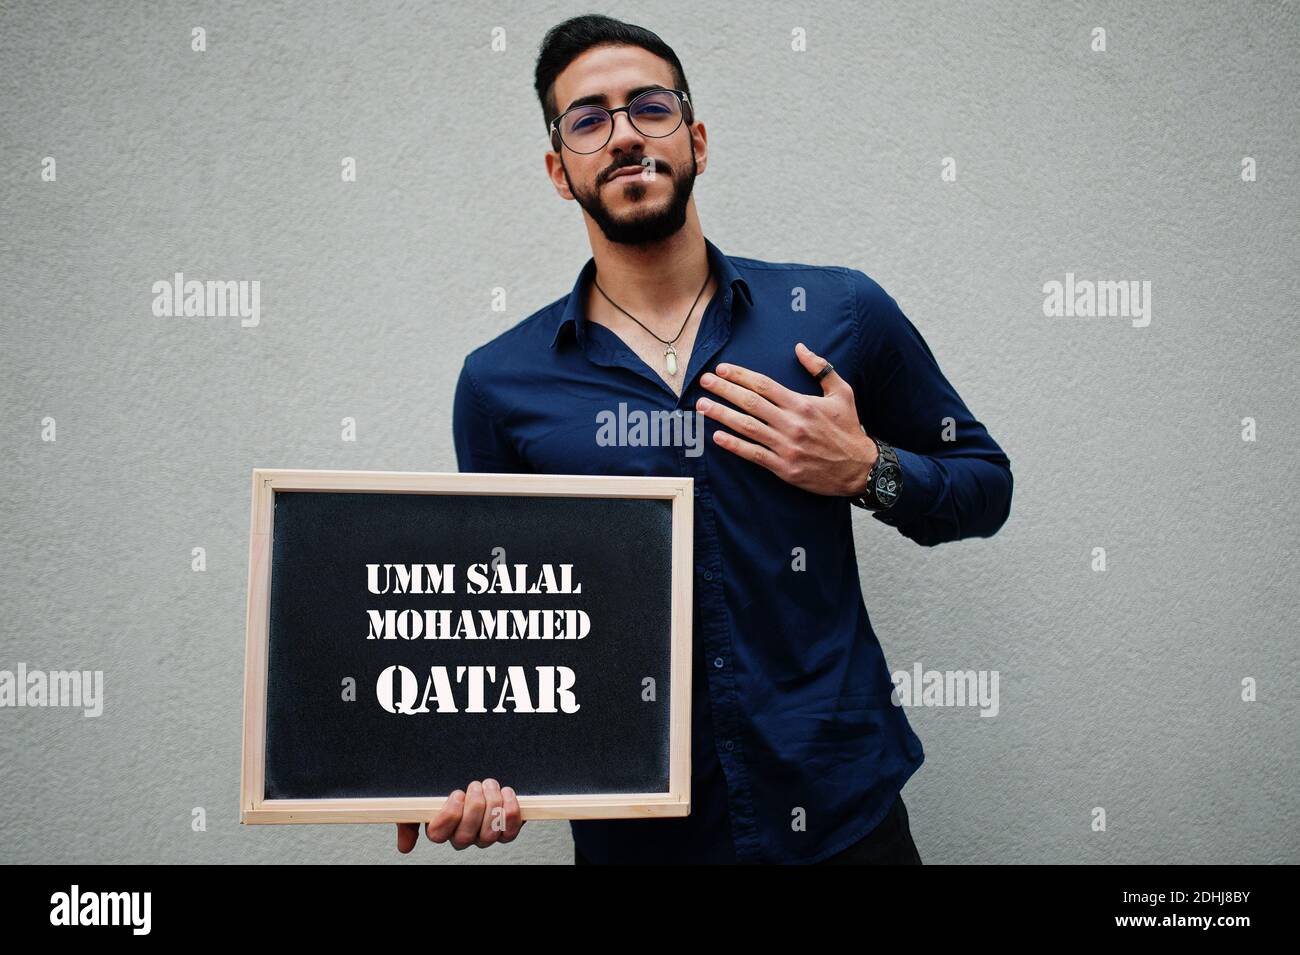 Arab man wear blue shirt and eyeglasses hold board with Umm Salal Mohammed Qatar inscription. Largest cities in islamic world concept. Stock Photo